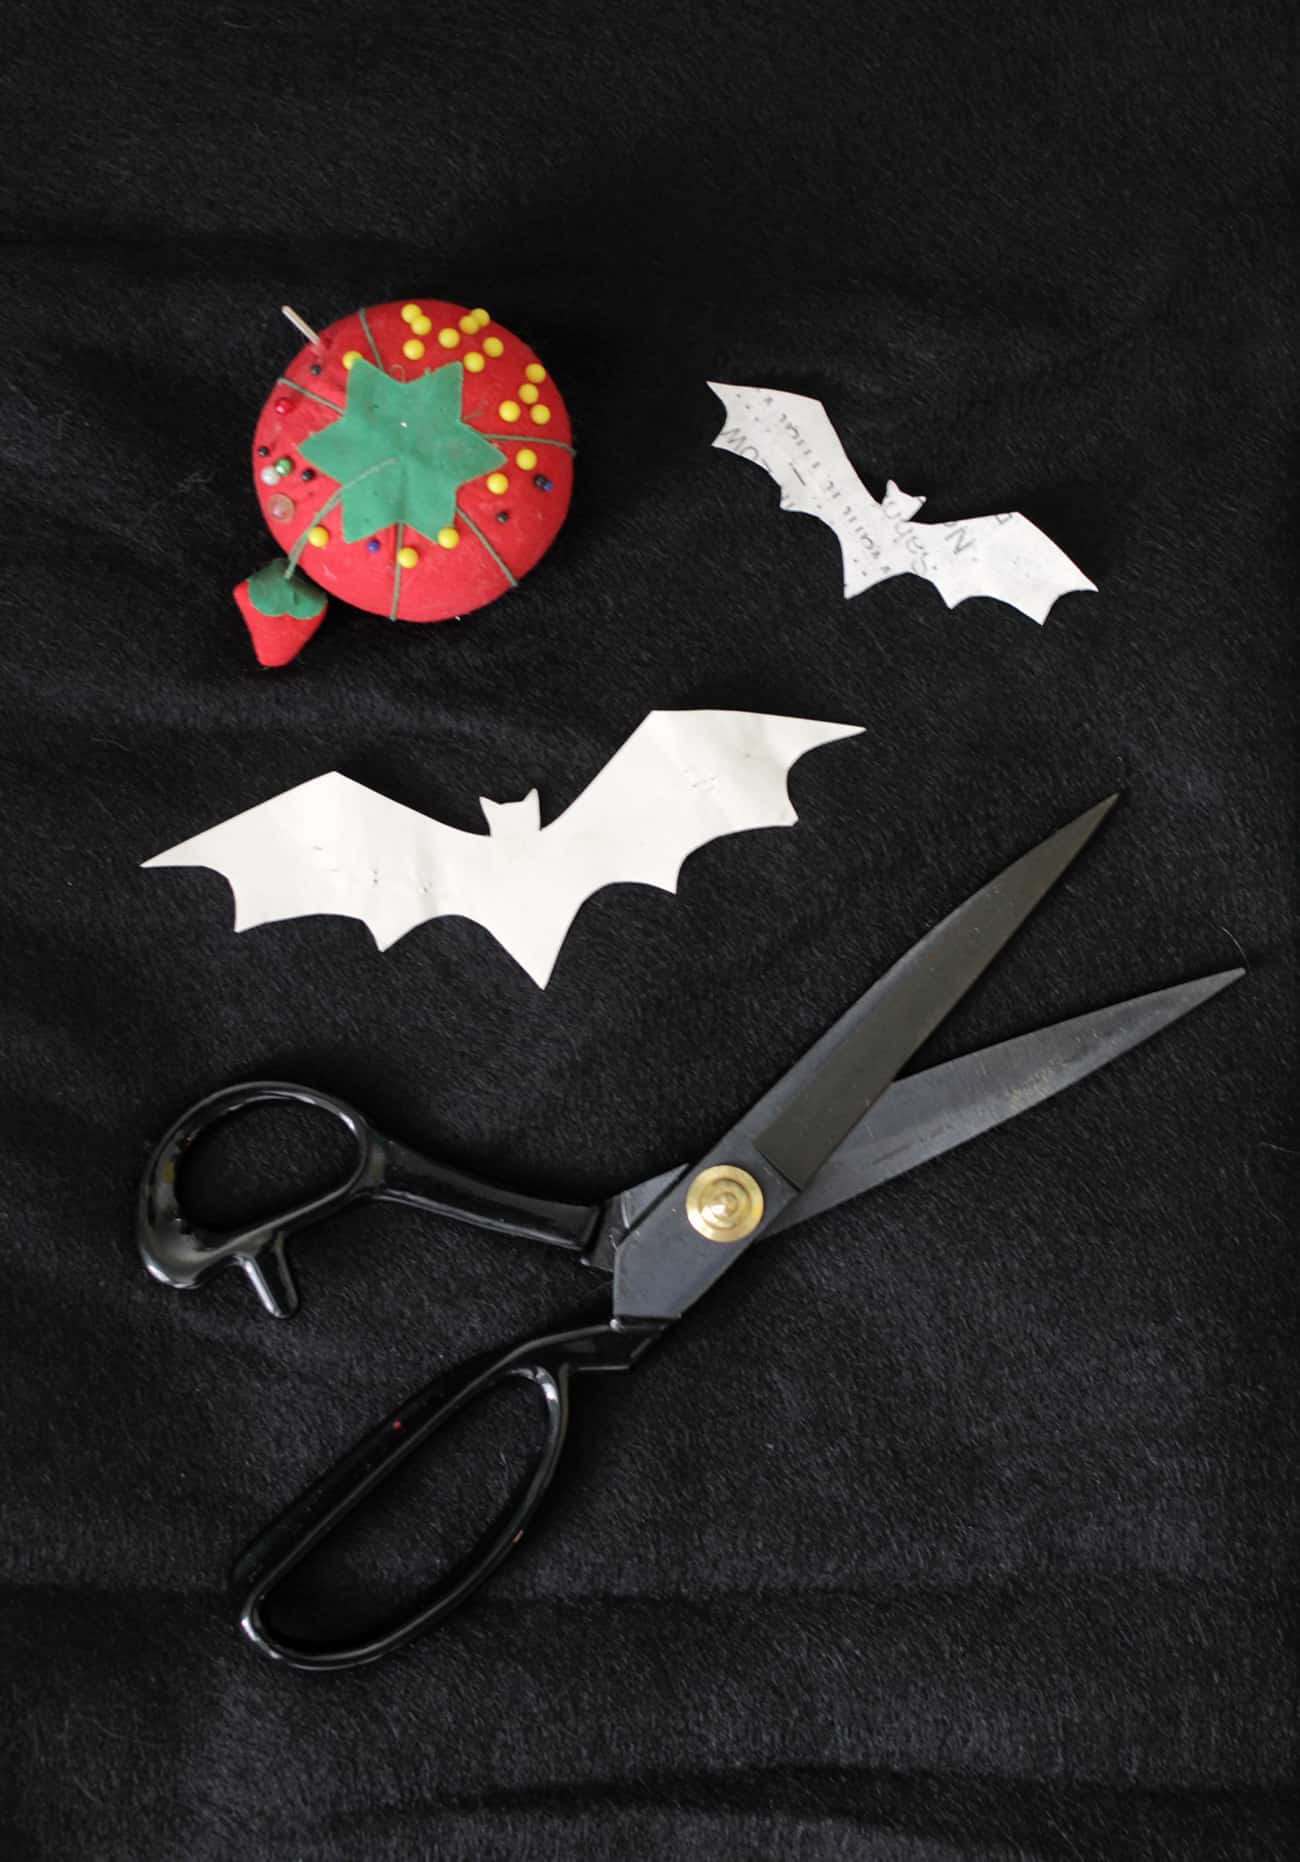 bat patterns cut out of crafting felt with fabric scissors and tomato pin cushion